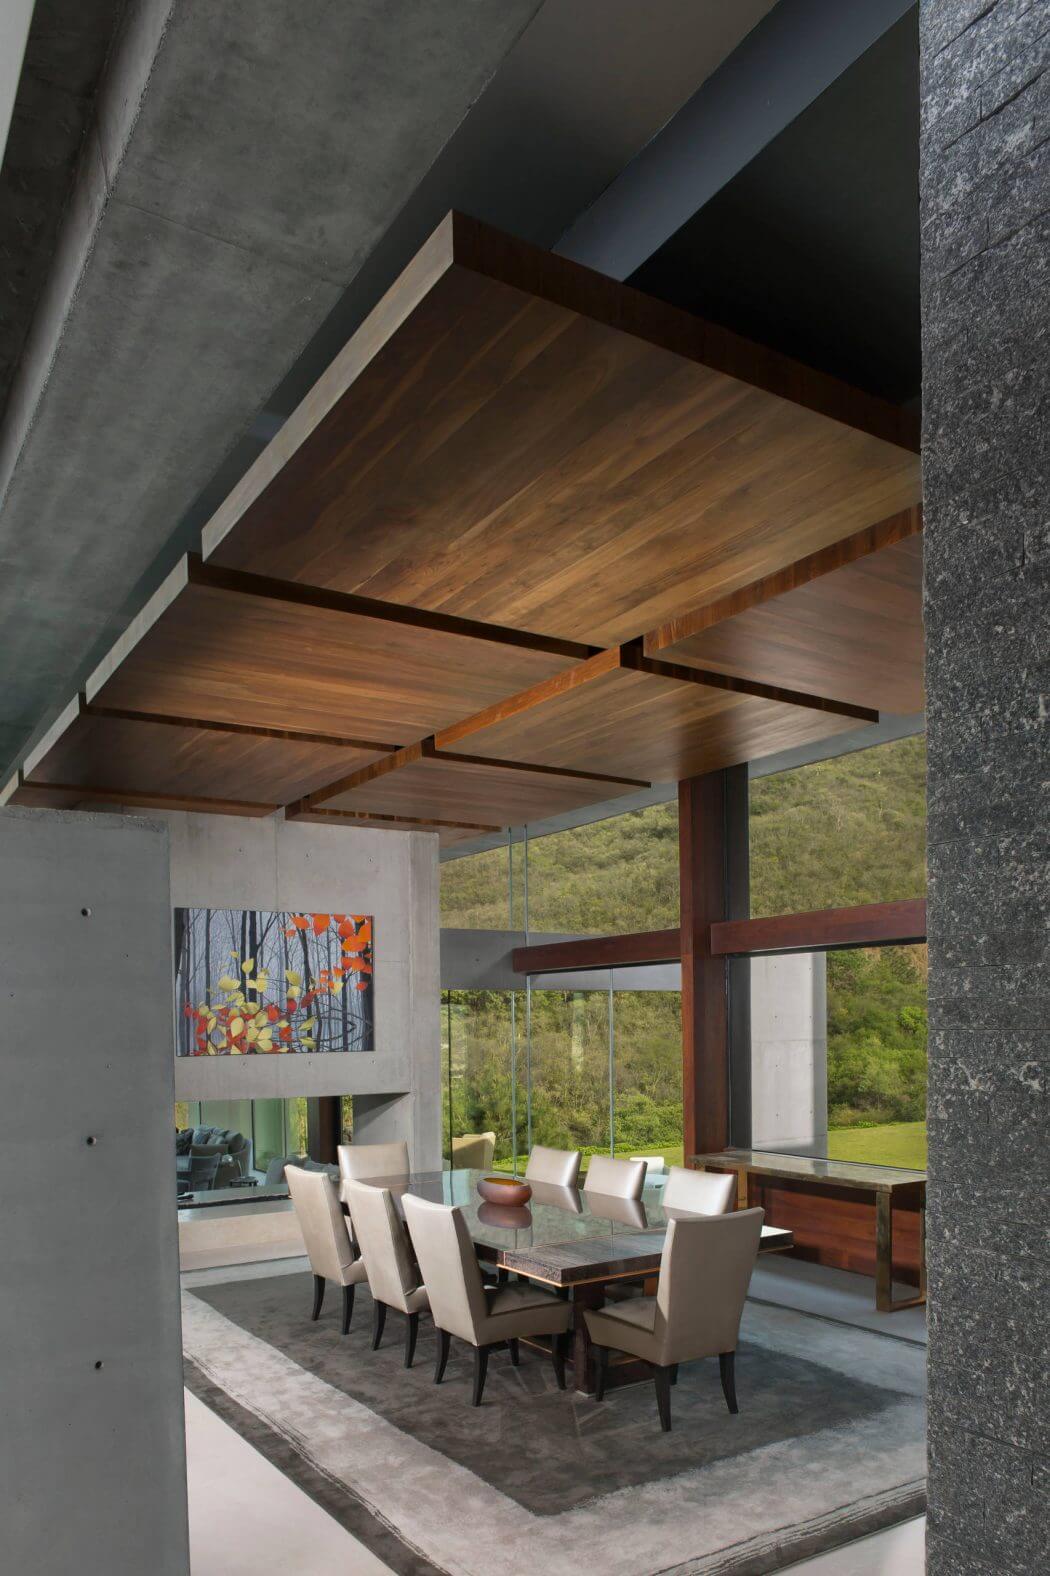 Striking modern dining room with exposed concrete walls, wood-paneled ceiling, and panoramic view.